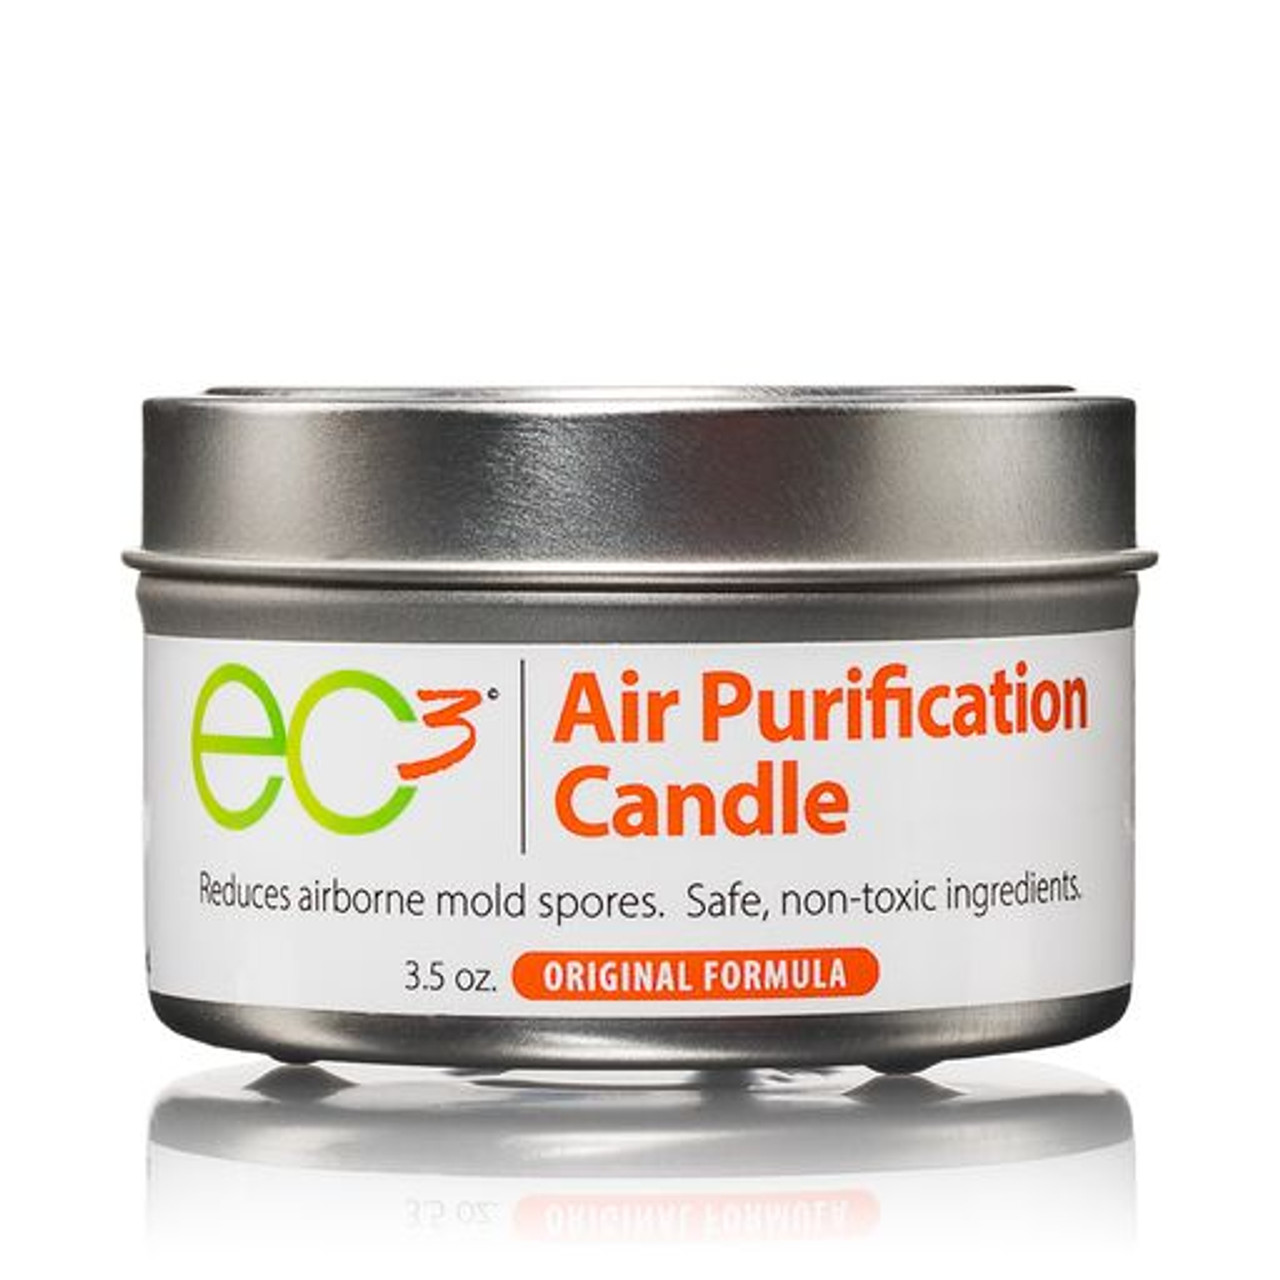 EC3 Air Purification Candles Review 